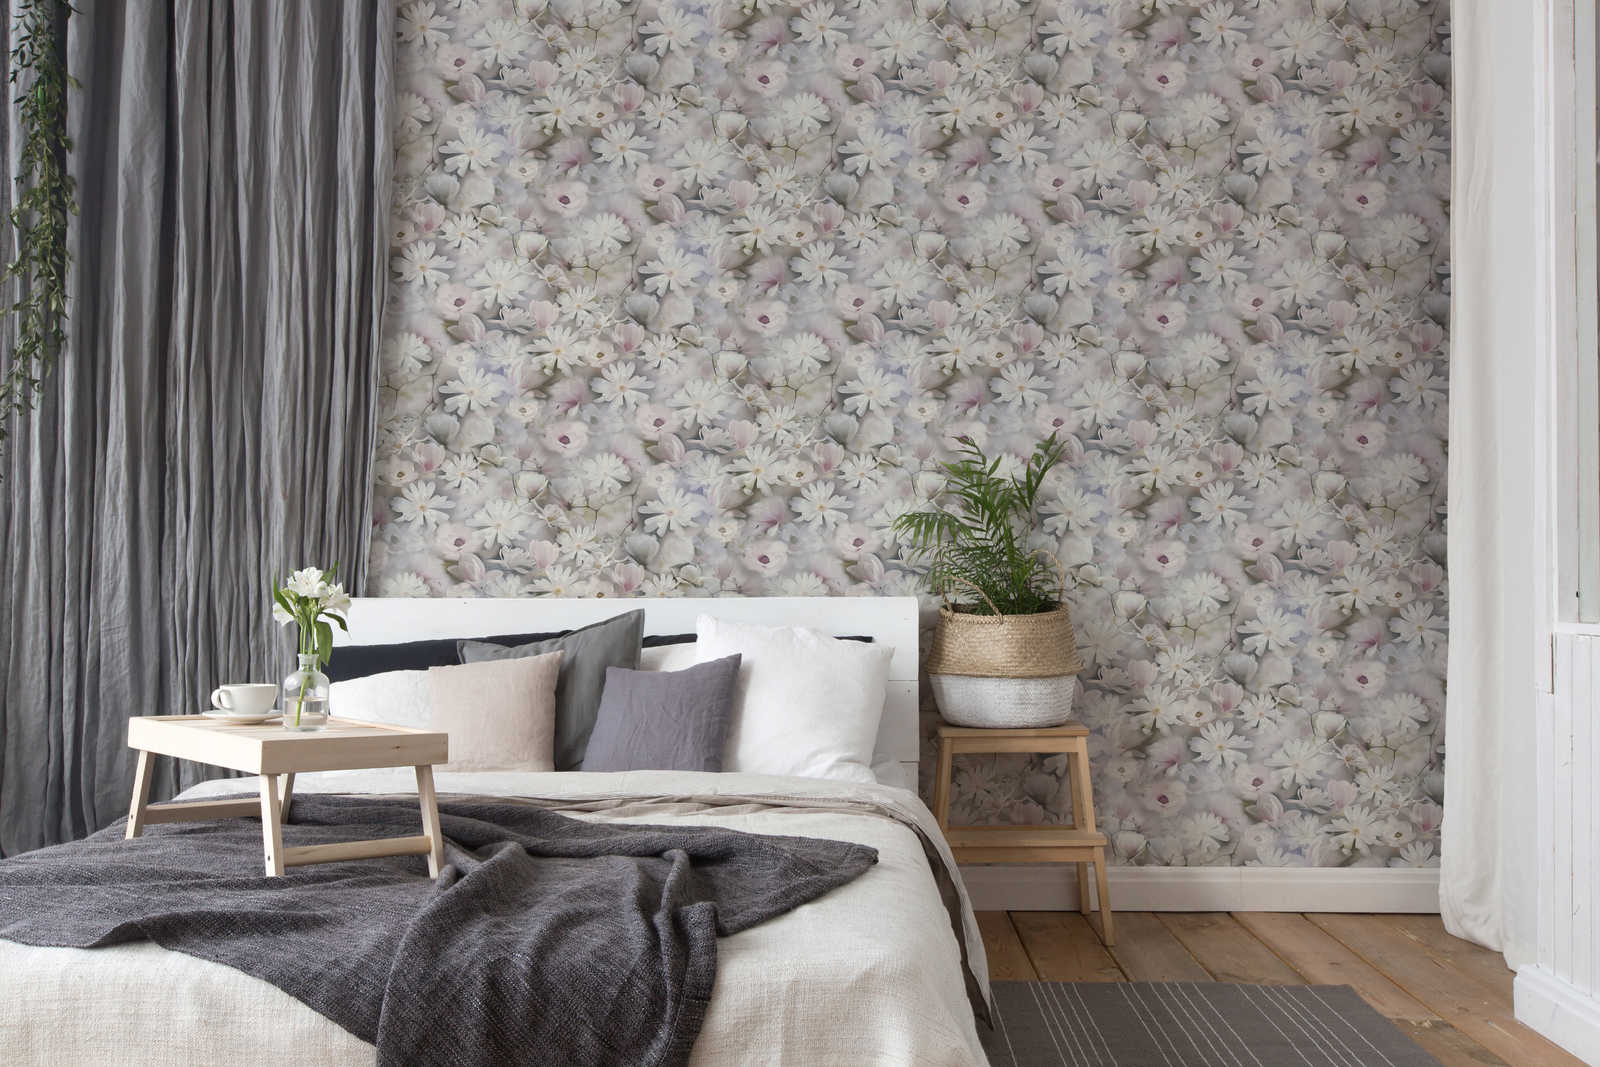             Wallpaper flowers collage in bright colours - grey, white
        